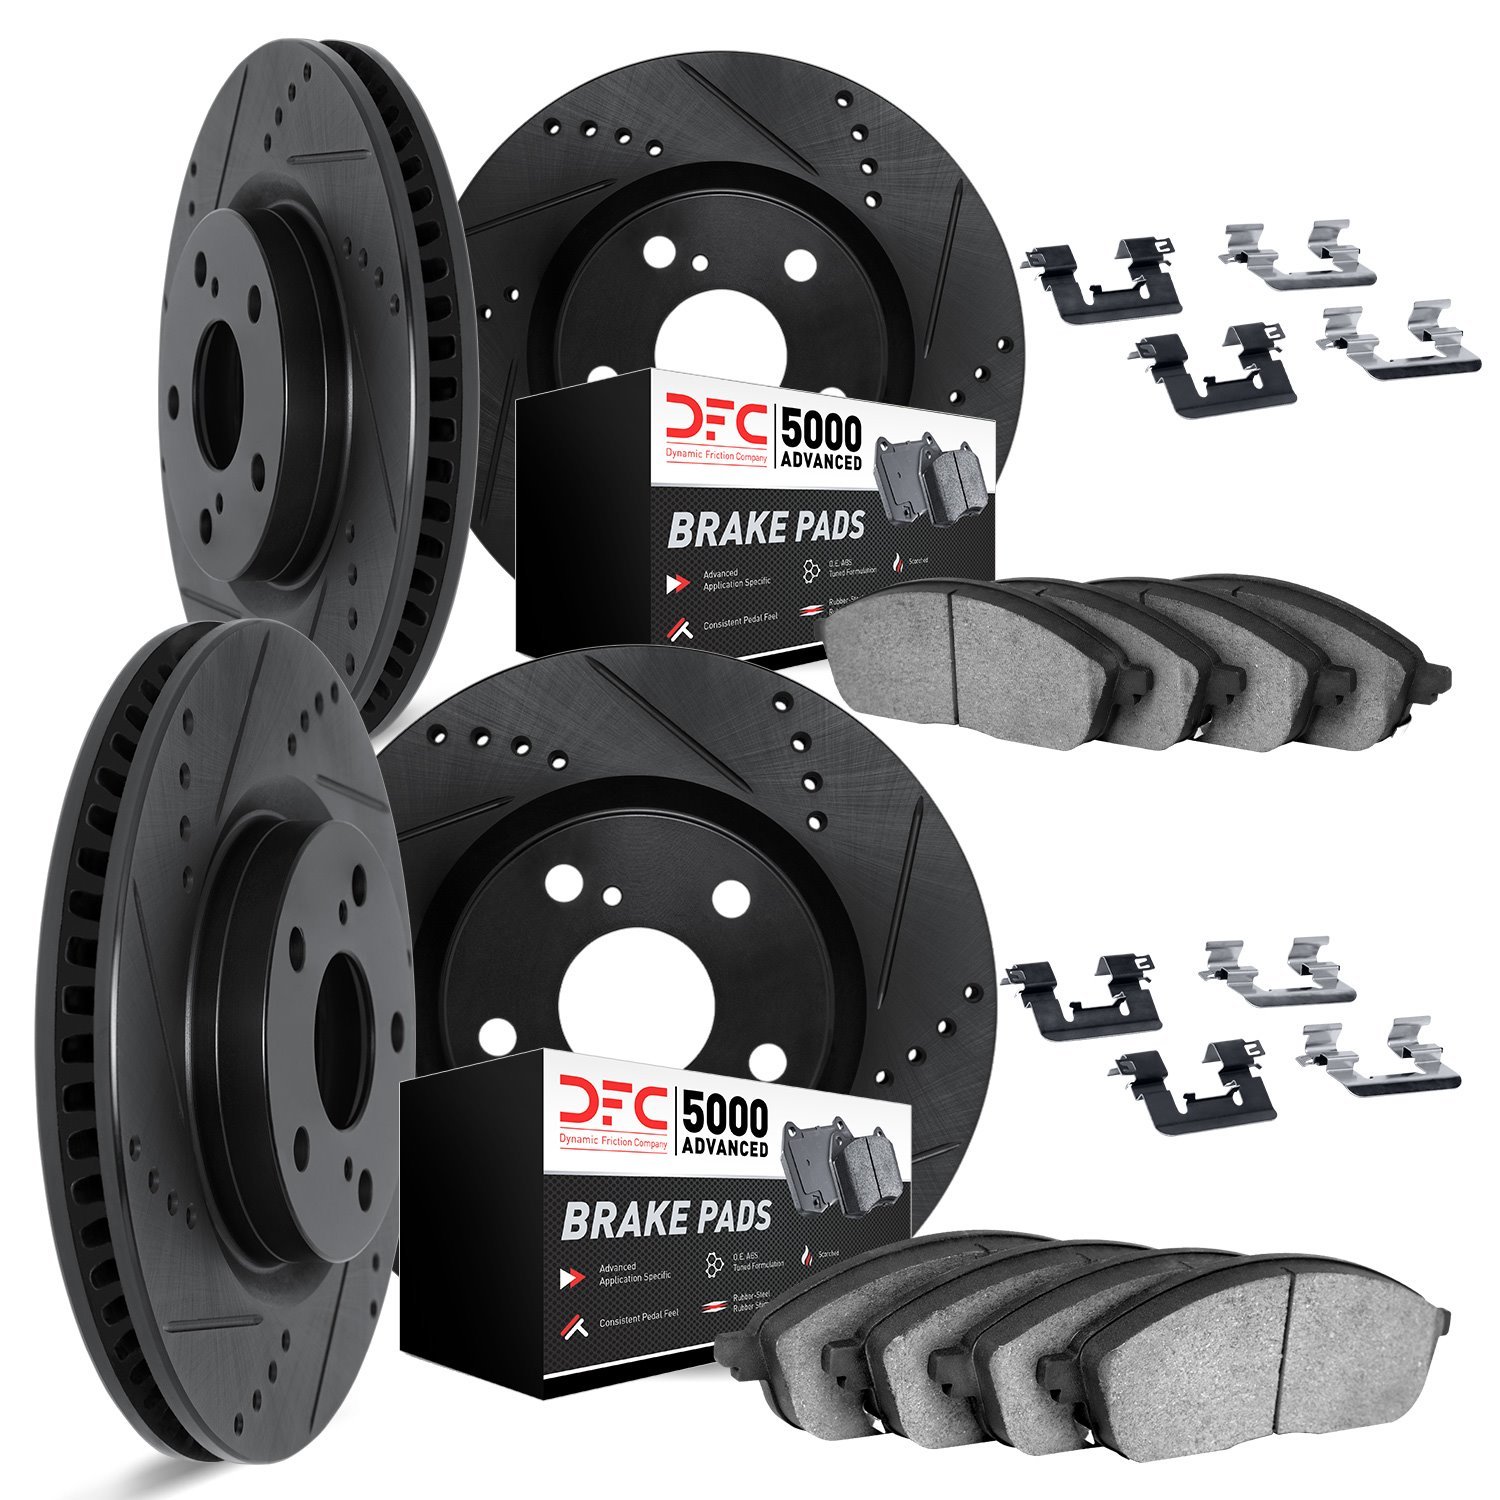 8514-31086 Drilled/Slotted Brake Rotors w/5000 Advanced Brake Pads Kit & Hardware [Black], 2015-2018 BMW, Position: Front and Re